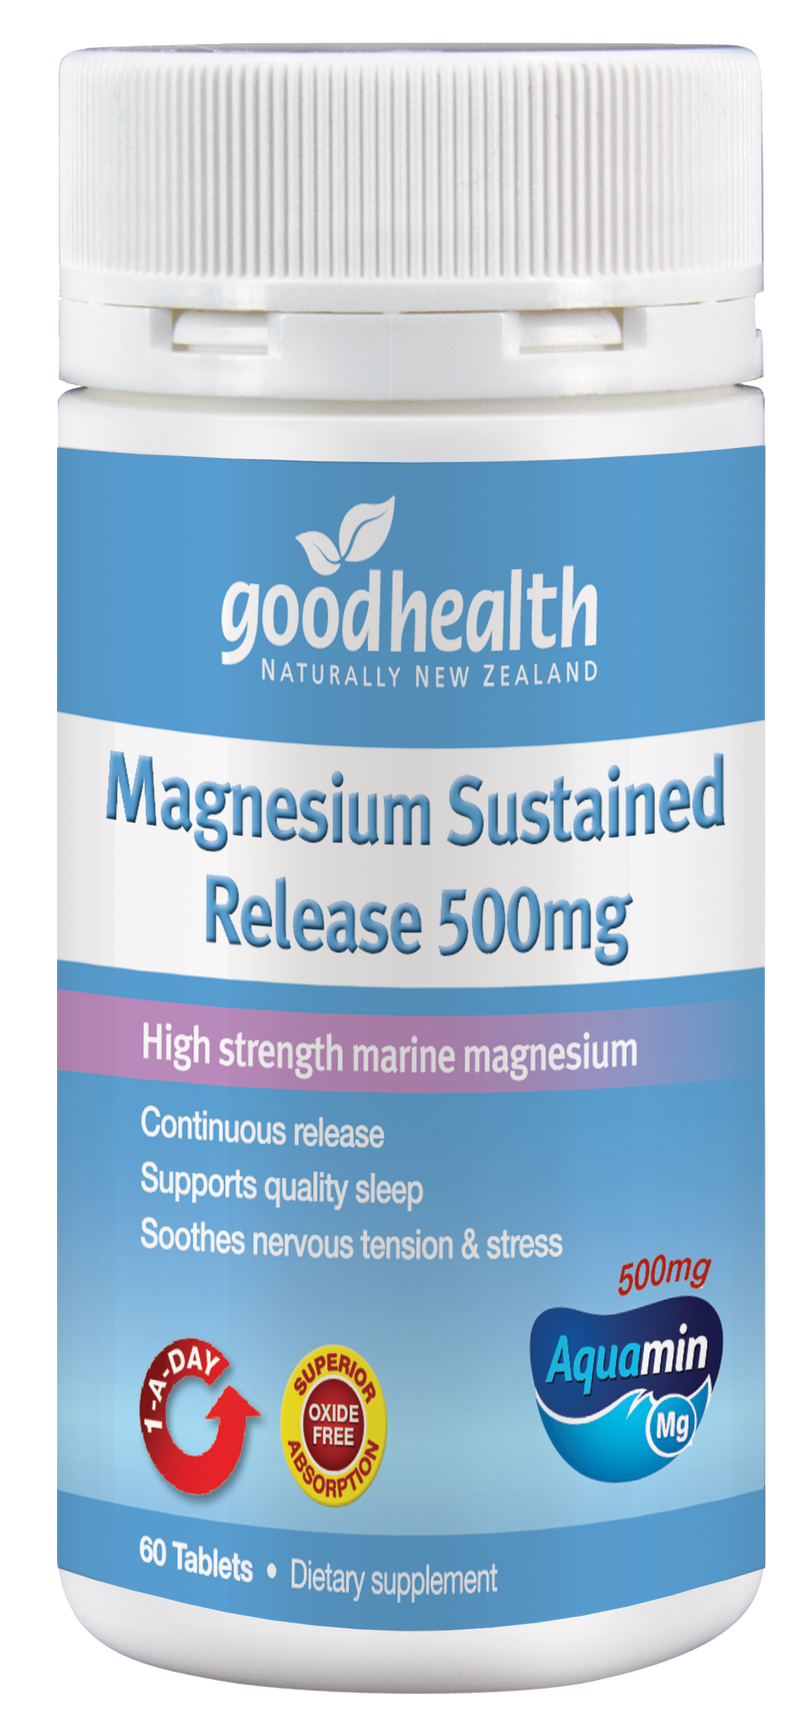 Good Health Magnesium Sustained Release Tablets 60